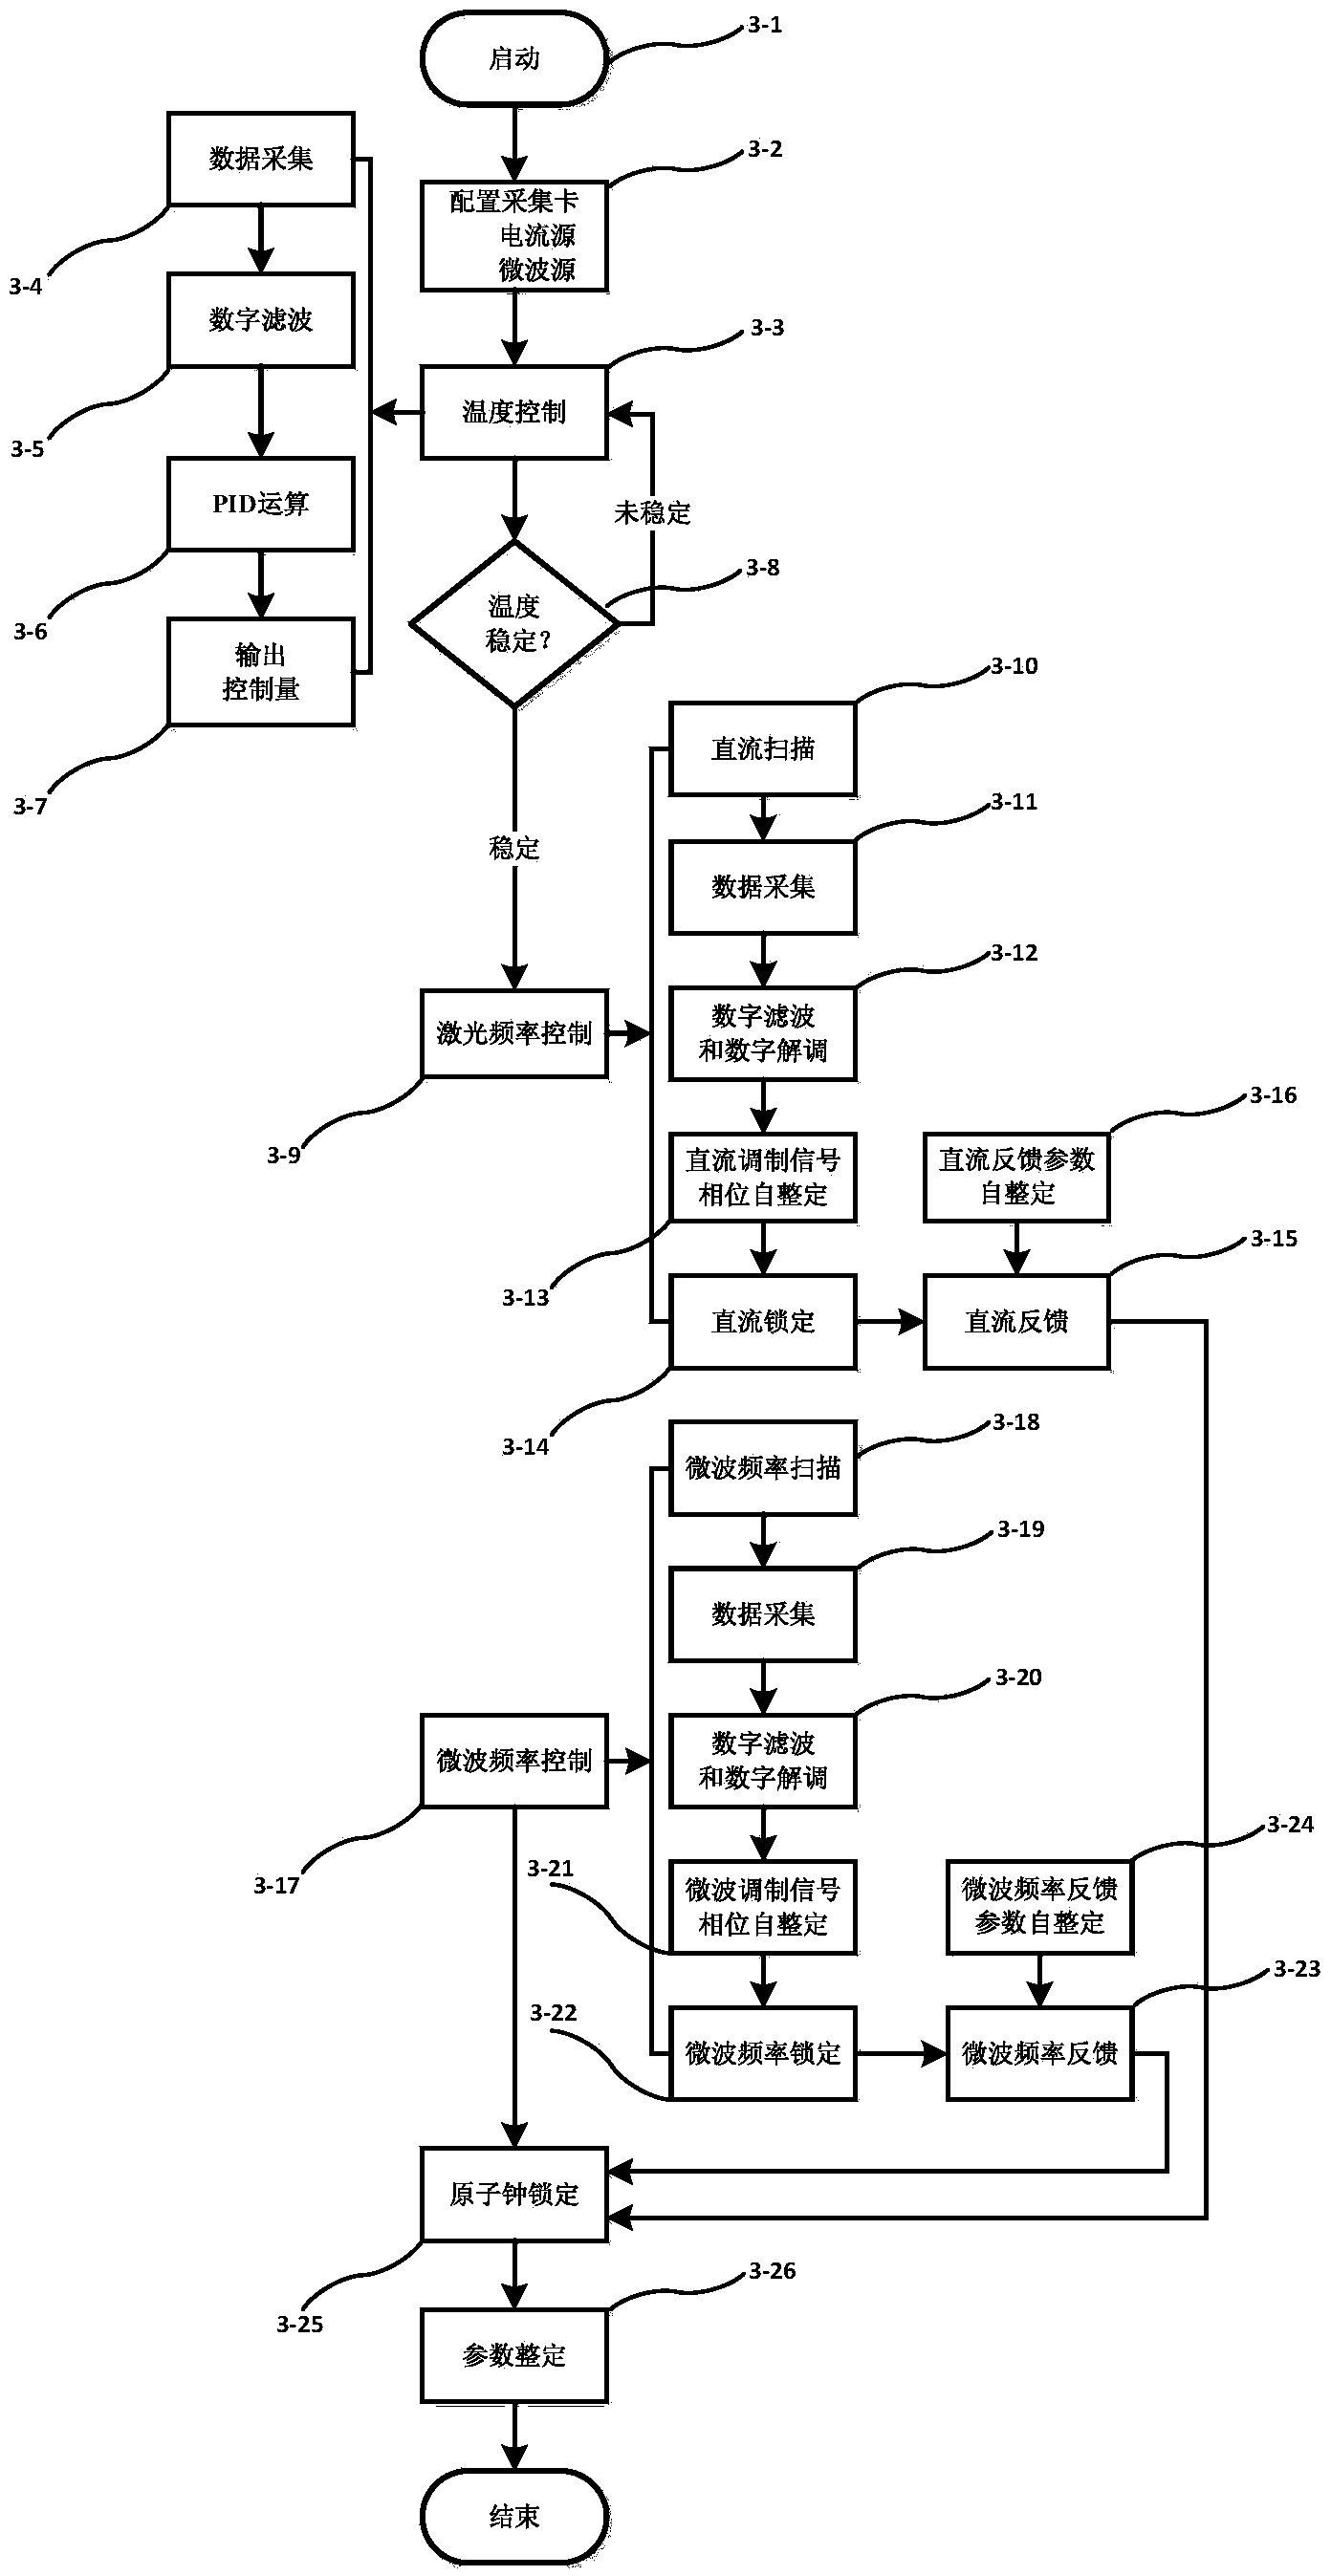 PXI (PCI eXtensions for Instrumentation) system-based passive CPT (Coherent Population Trapping) atomic clock experimental facility and method